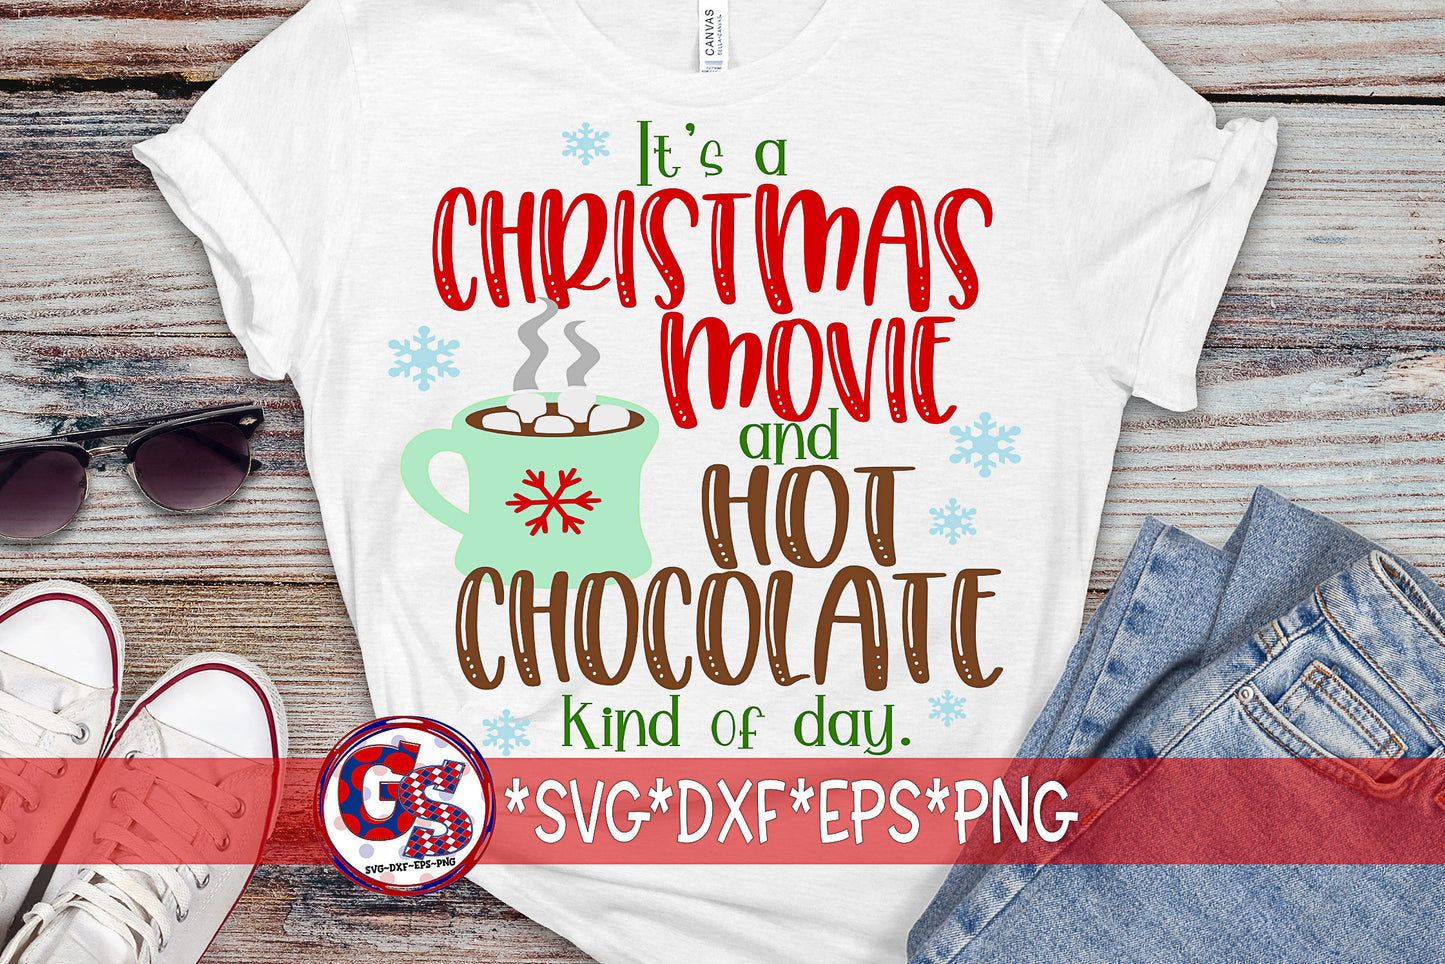 Christmas Movie and Hot Chocolate Kind of Day svg, dxf, eps, png. Christmas SVG | Christmas DxF | Instant Download Cut Files.